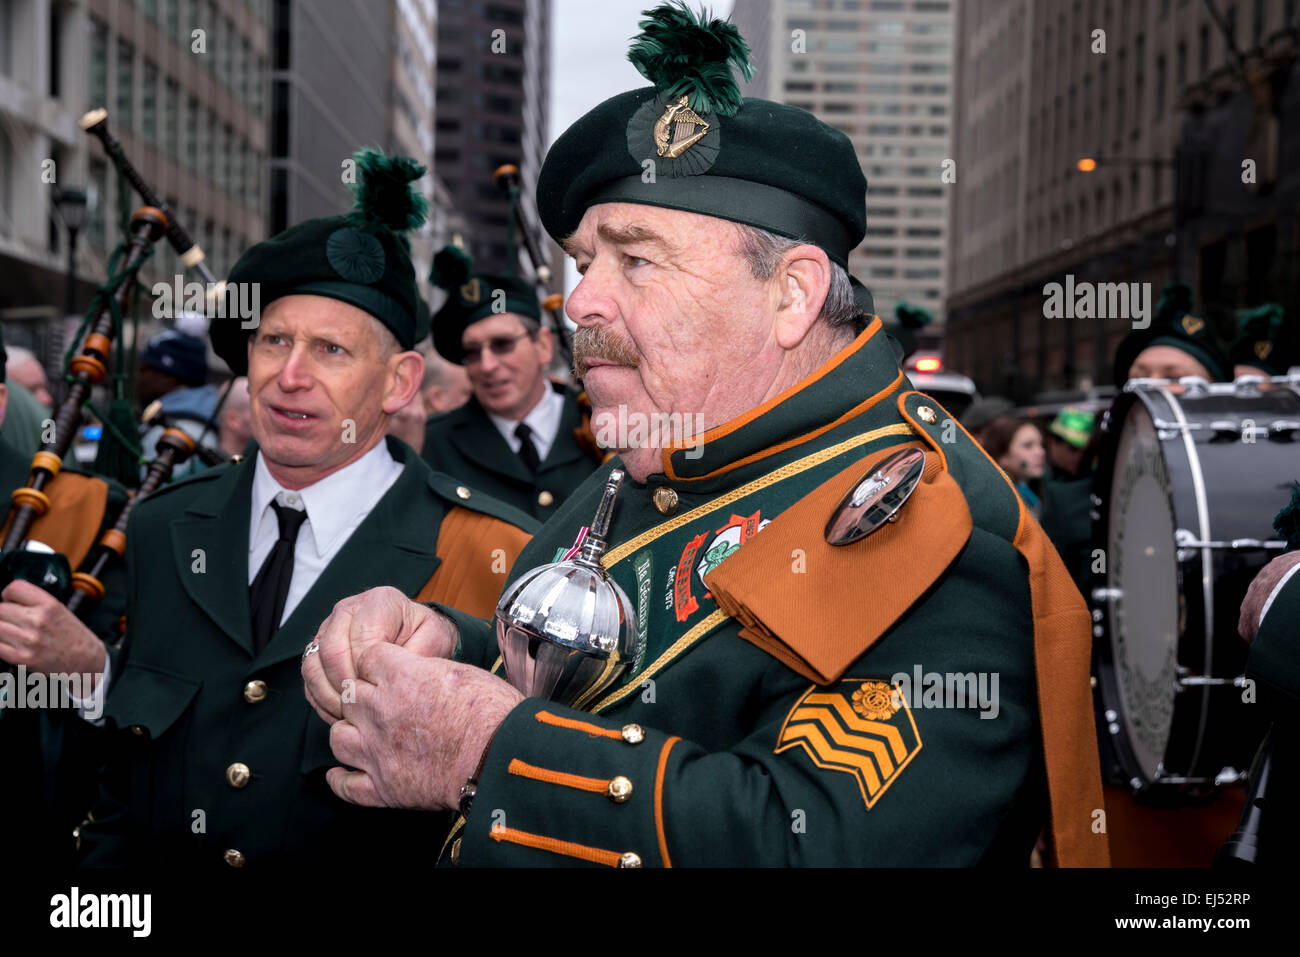 Leading musician of of Philadelphia Emerald Society Pipe Band with wand, St. Patrick's Day Parade, Philadelphia, USA Stock Photo